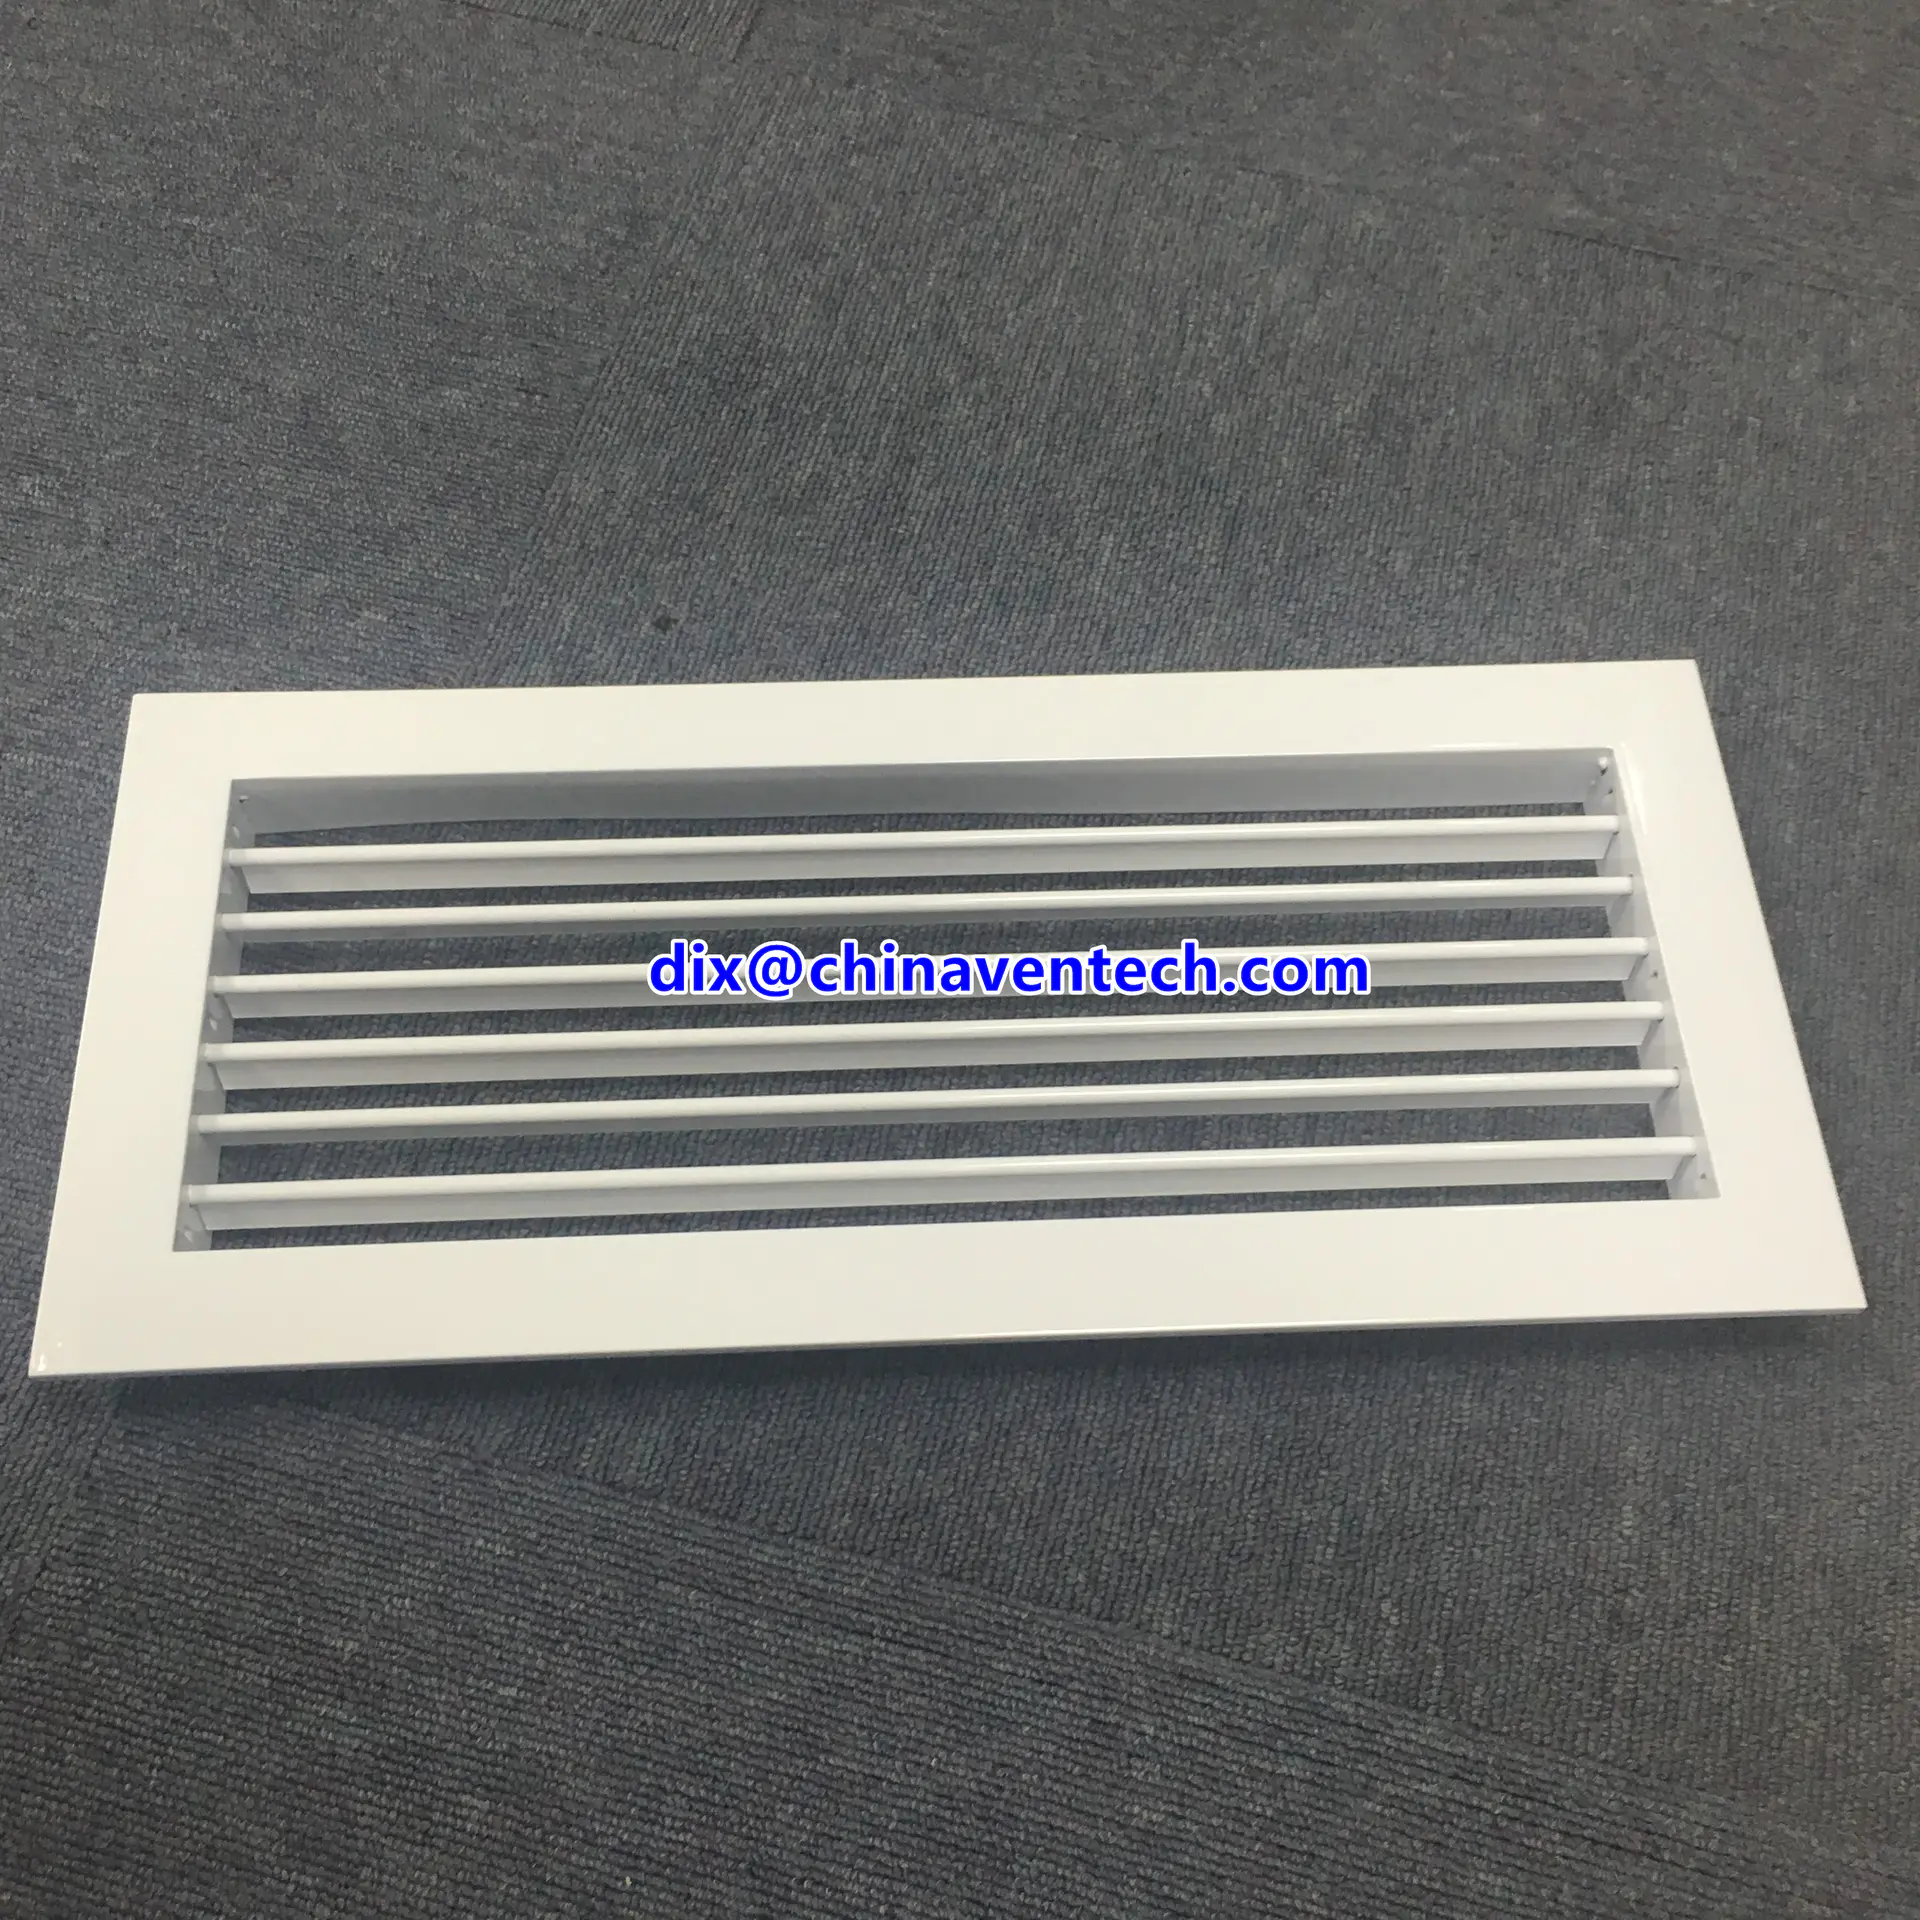 Hvac Central Air Conditioning Ventilation Air Ceiling Single Deflection Grille